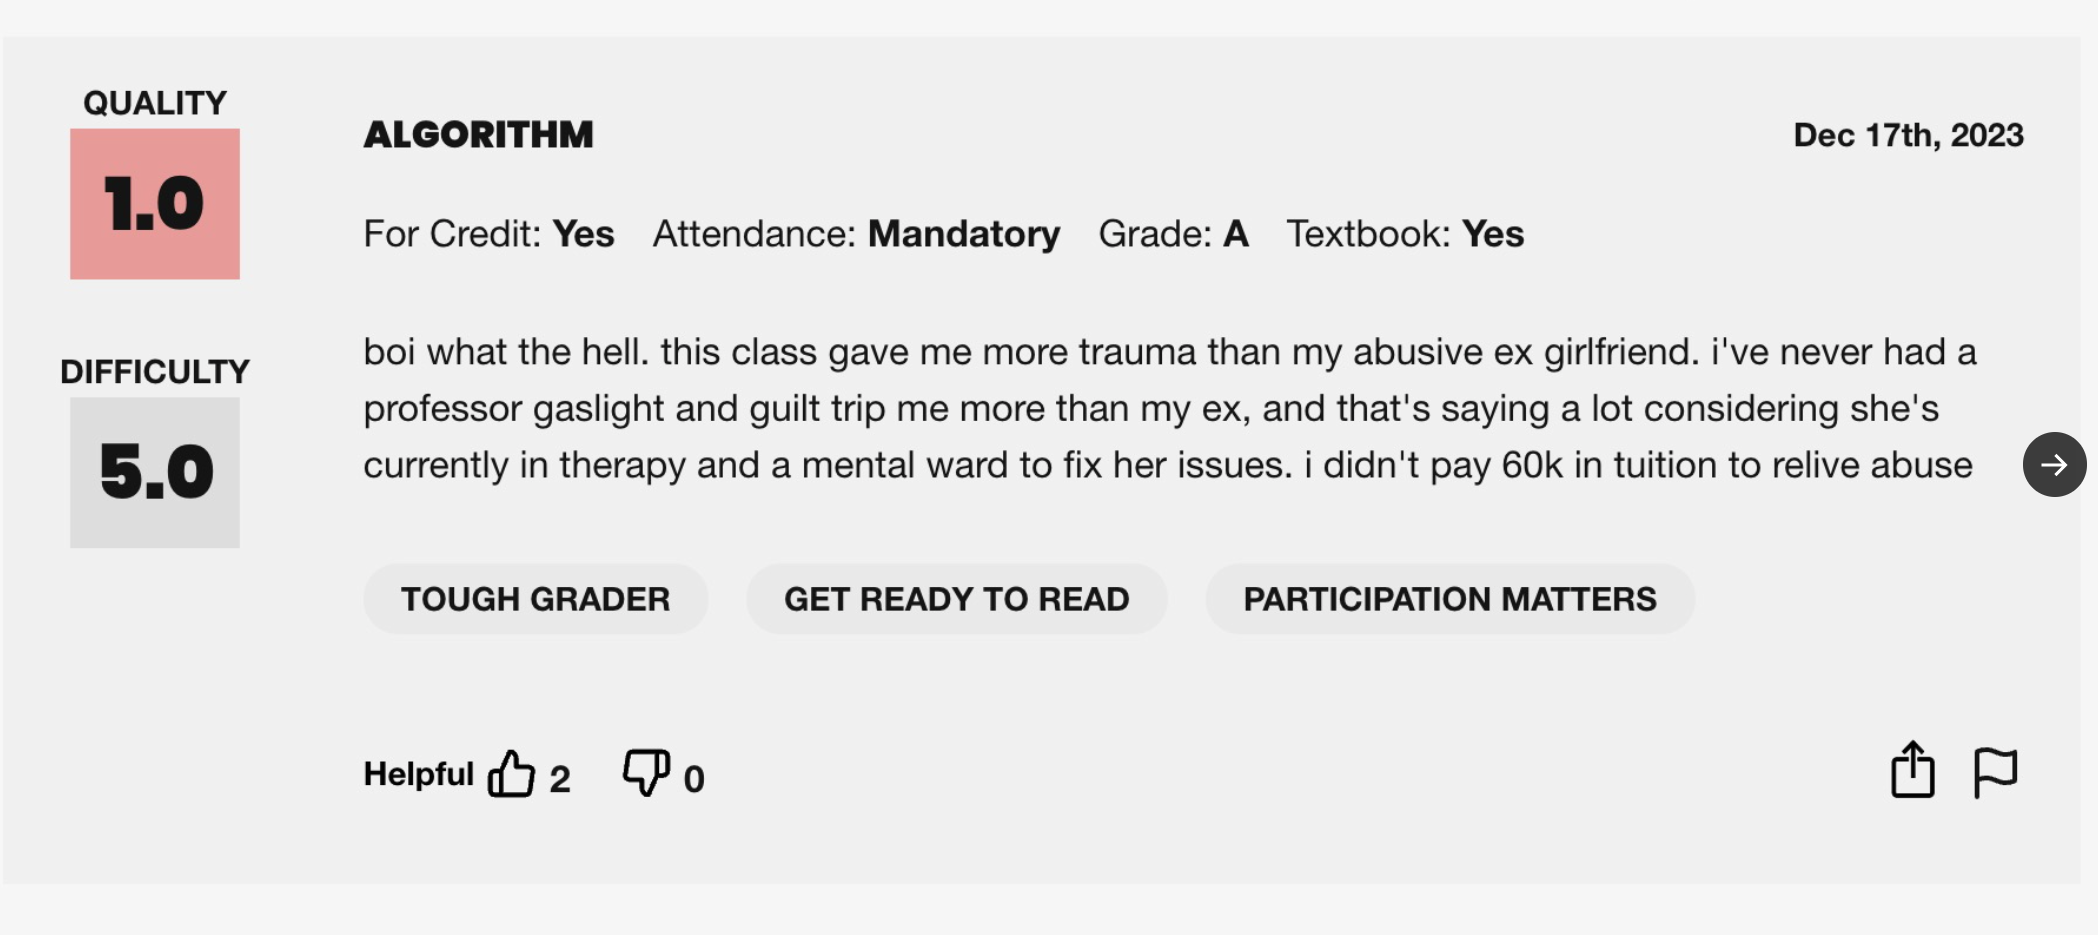 this class gave me more trauma than my abusive ex-girlfried. I&#x27;ve never had a professor gaslight and guilt trip me more